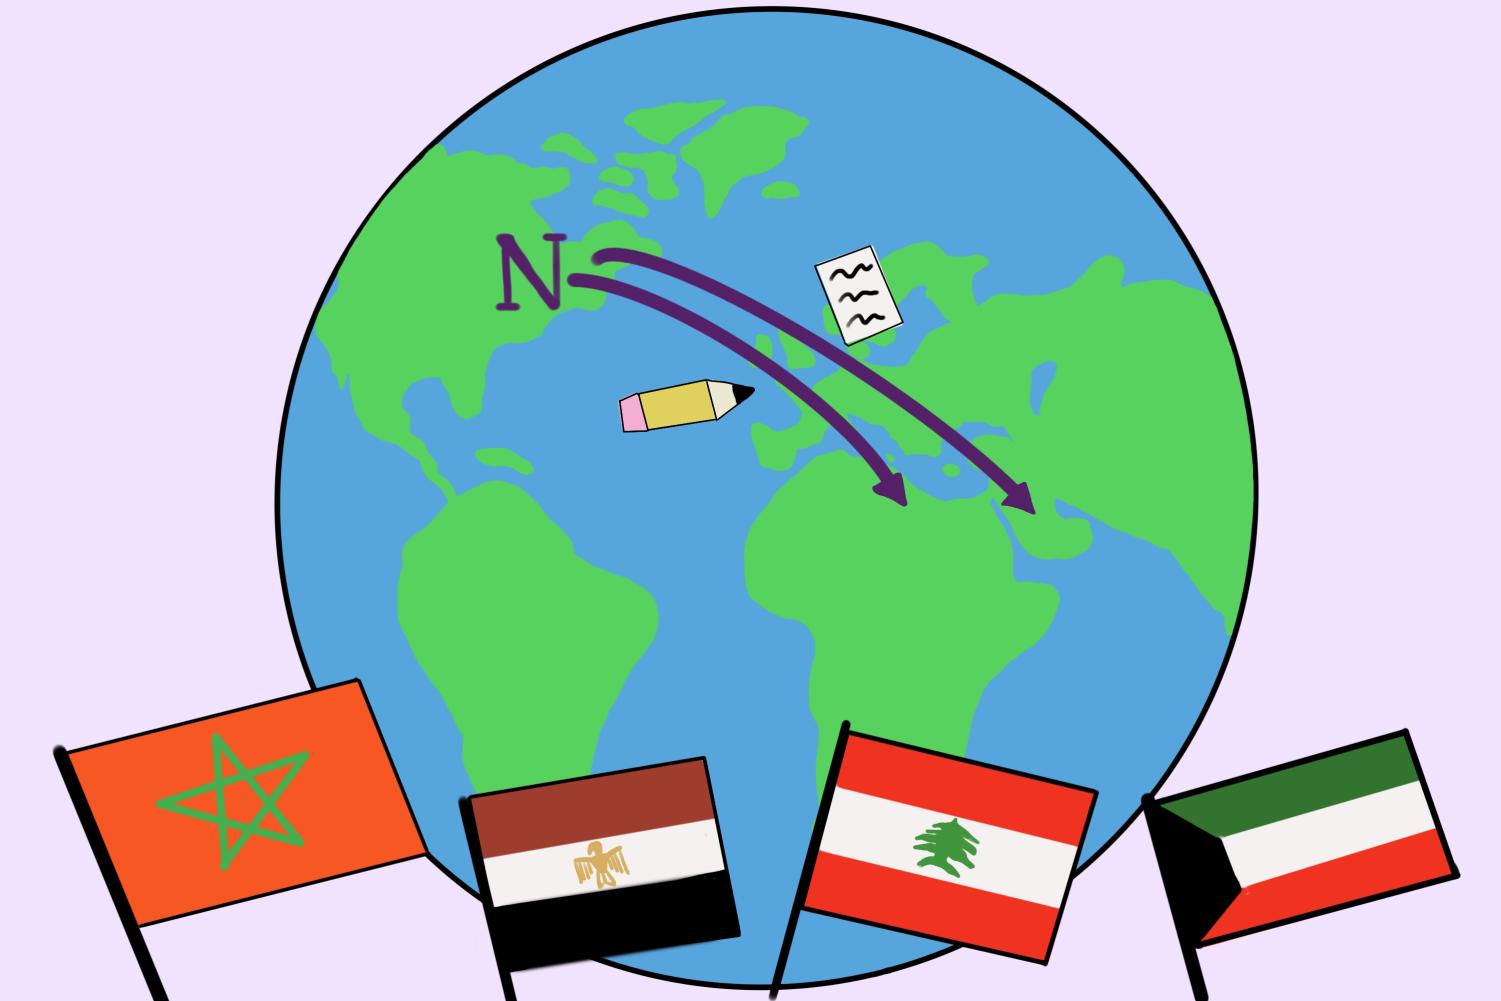 Globe+with+purple+arrows+pointing+from+North+America+toward+where+Egypt+and+Palestine+are+located.+Flags+of+Morocco%2C+Egypt%2C+Lebanon%2C+Kuwait+are+pictured+at+the+bottom+in+left+to+right+order.